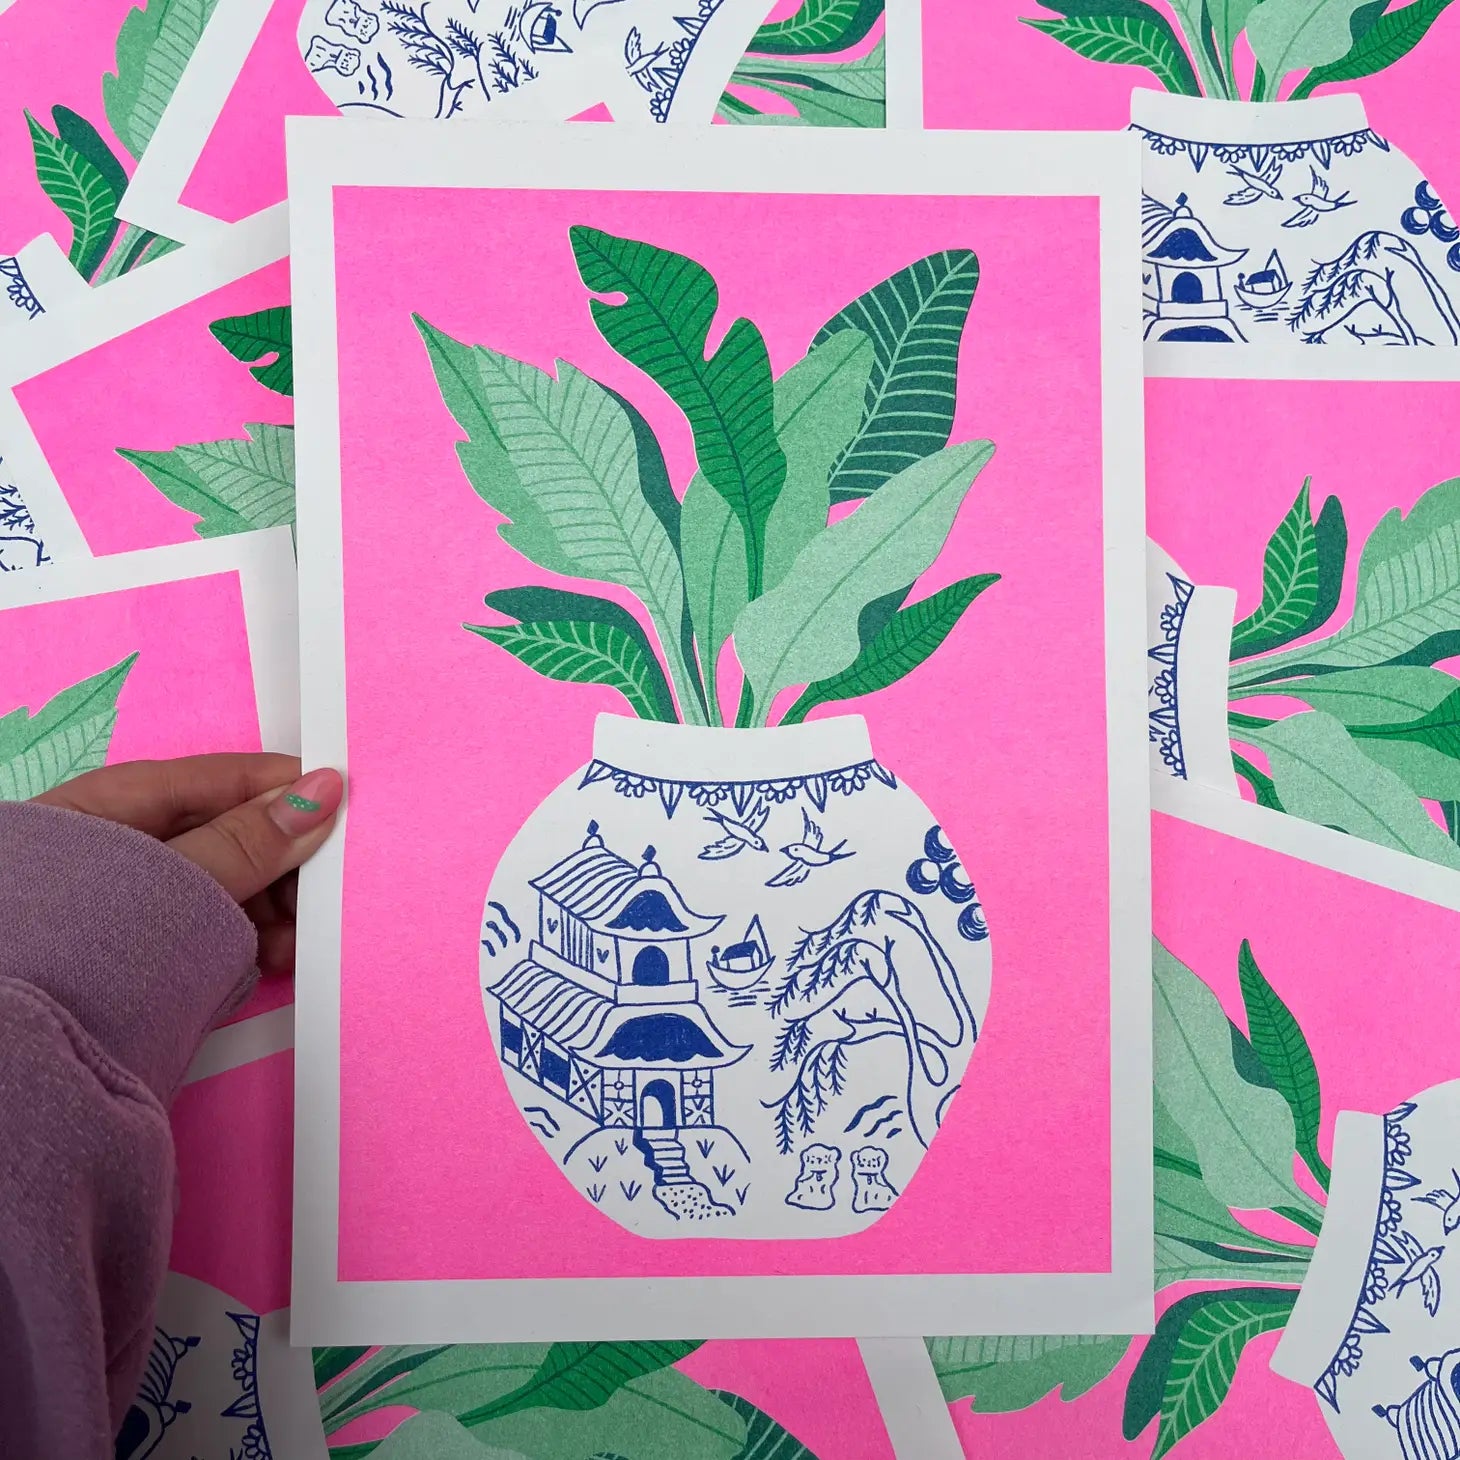 handmade print willow pattern by Amy Hastings, neon pink background with green plant in white and blue printed vase